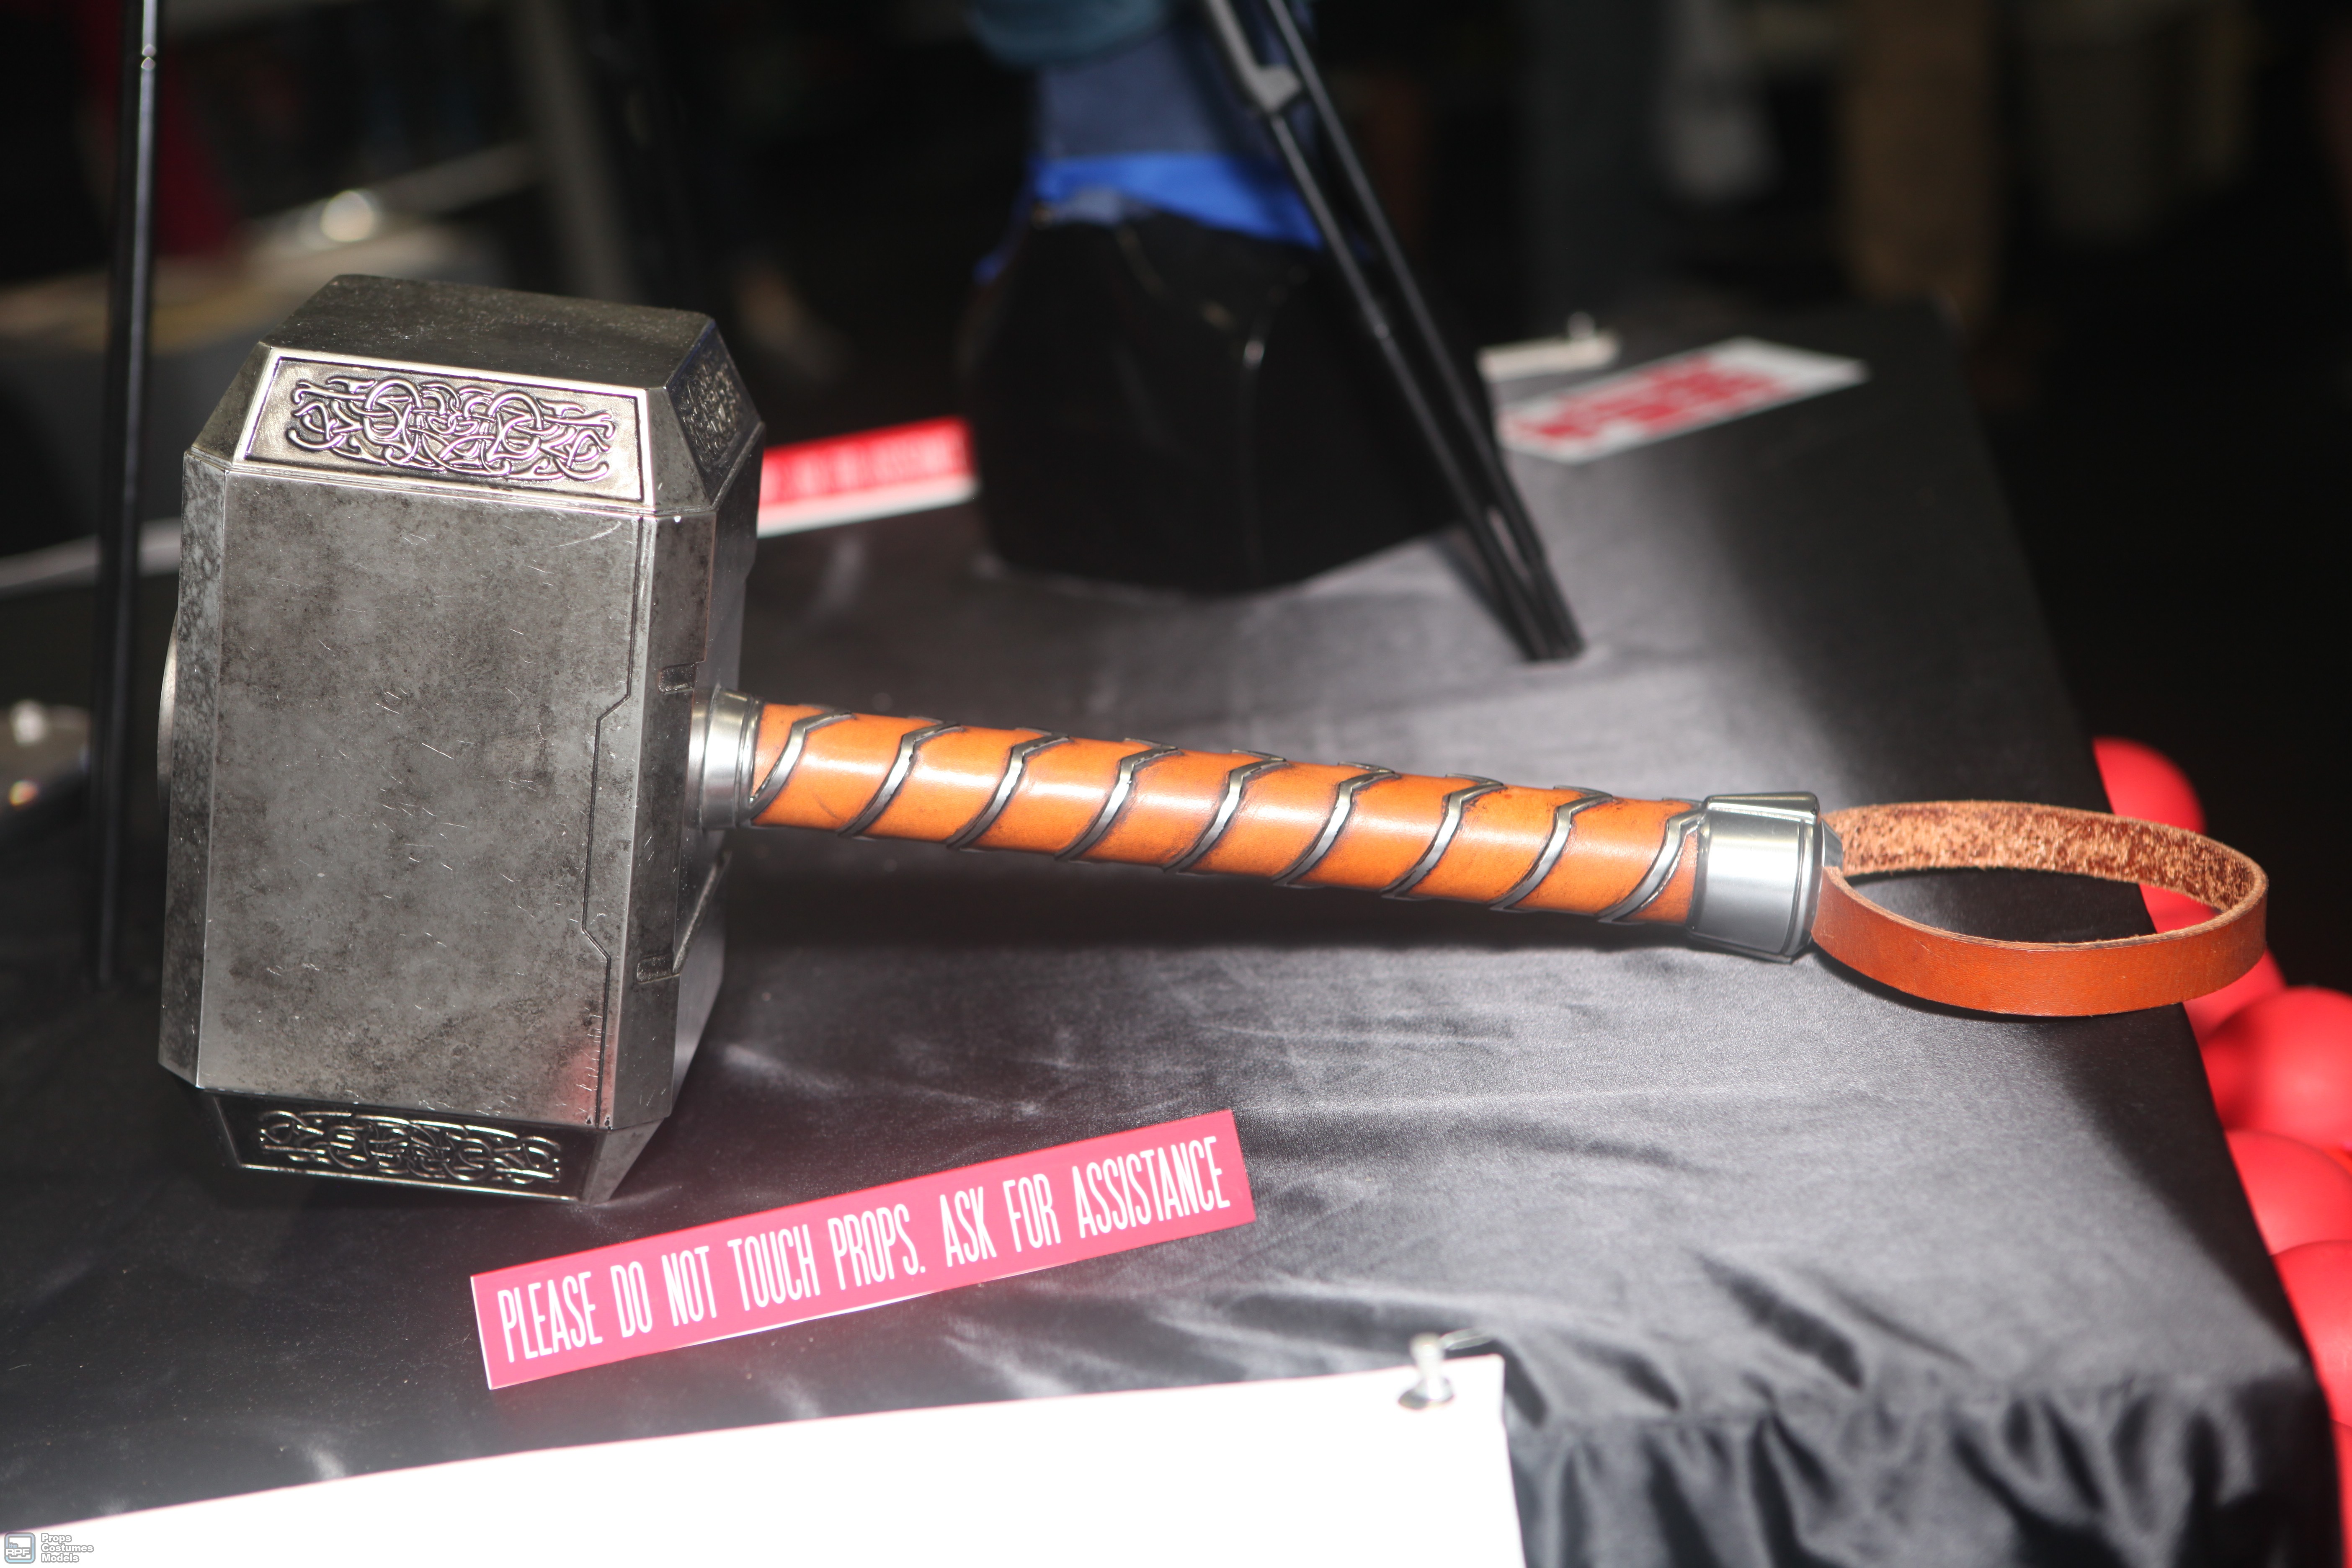 eFX Collectibles - Marvel Thor hammer